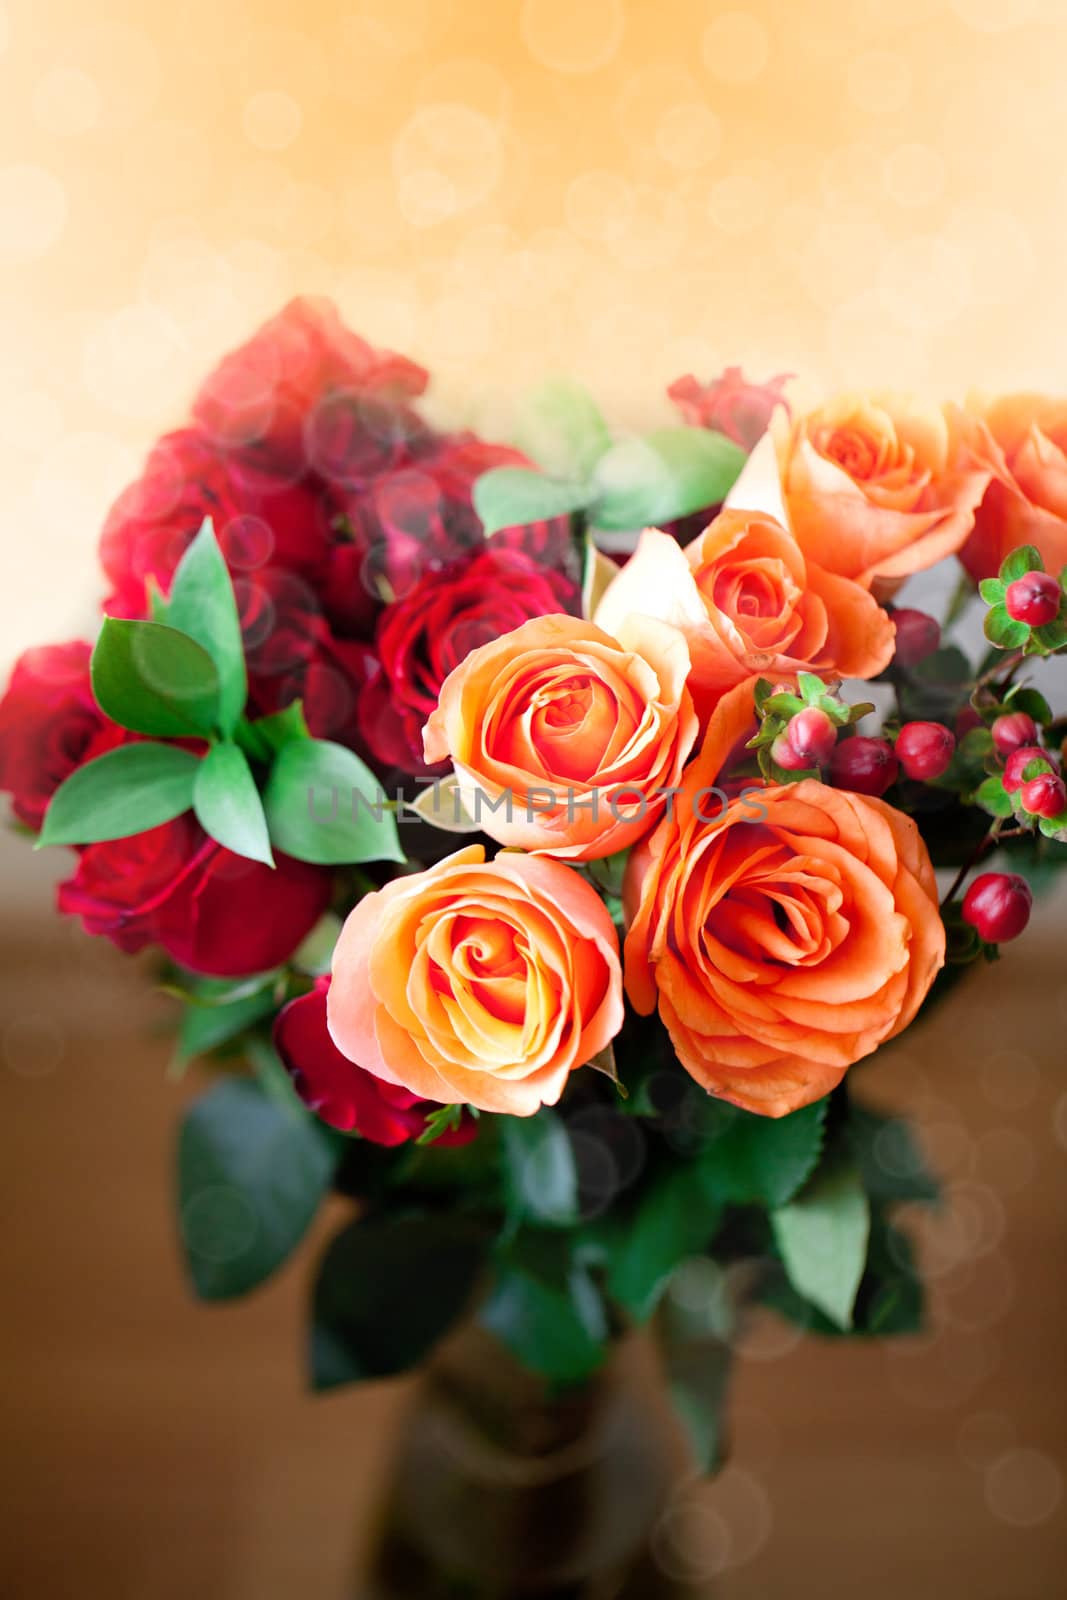 bouquet of colorful roses in vase with bokeh by jannyjus